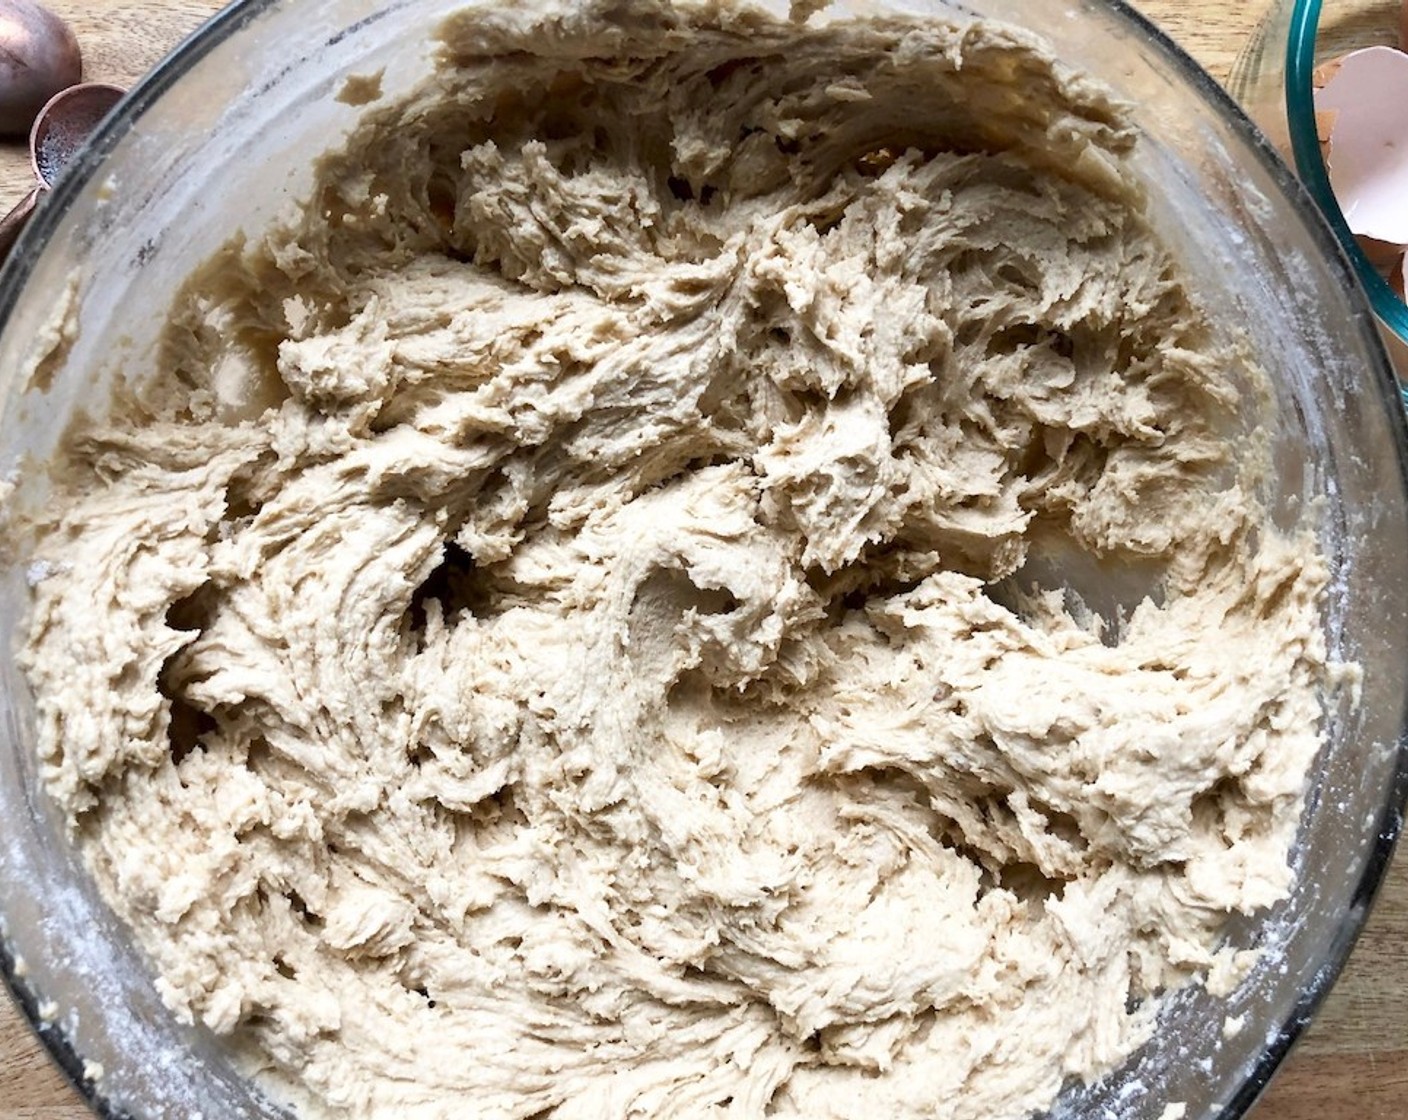 step 4 Meanwhile, sift the All-Purpose Flour (1 3/4 cups), Baking Soda (1 tsp), and Salt (1/2 tsp) into a medium bowl. With the mixer on low, slowly add the flour mixture to the butter-sugar mixture. Be cautious not to overbeat it.